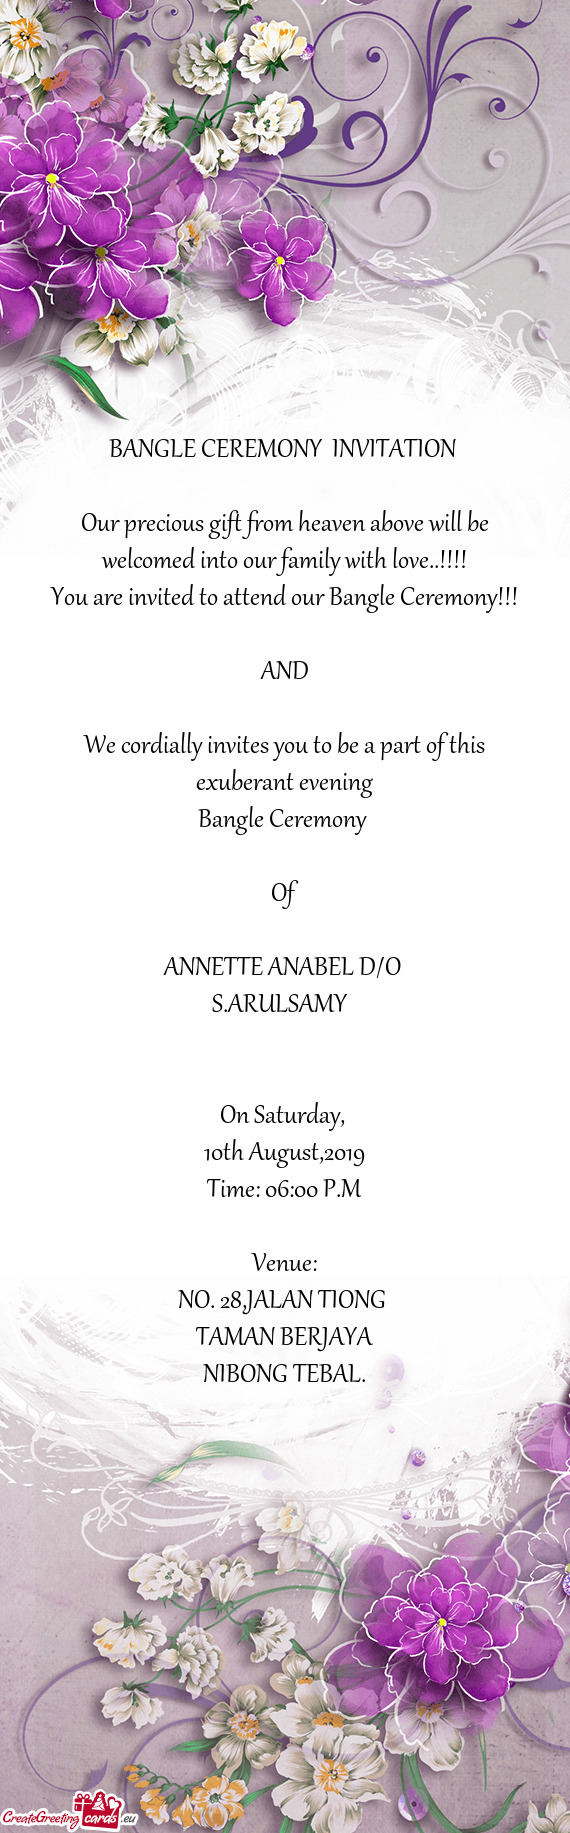 We cordially invites you to be a part of this exuberant evening